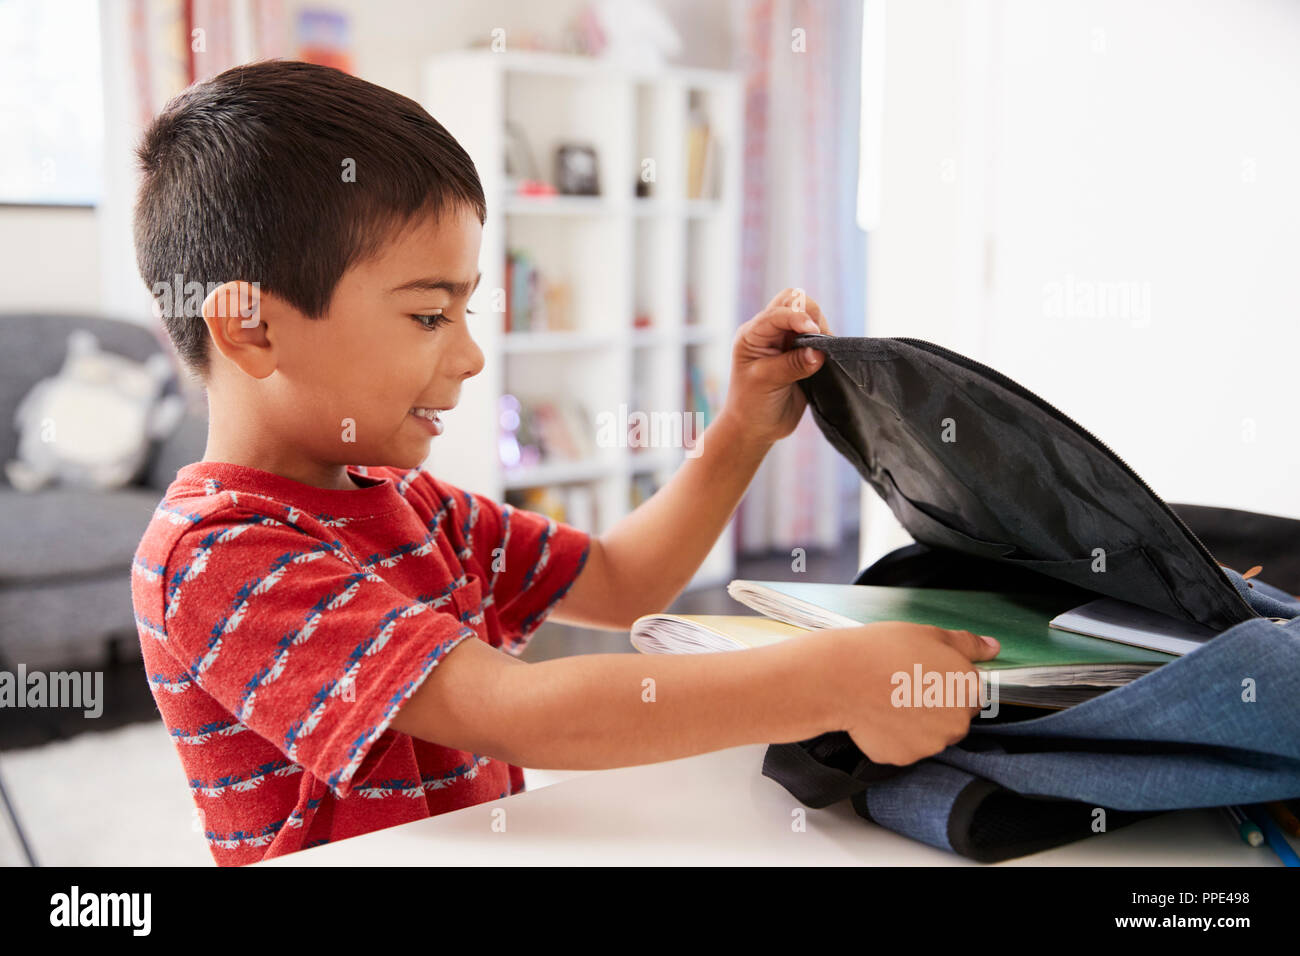 Boy In Bedroom Packing Bag Ready For School Stock Photo